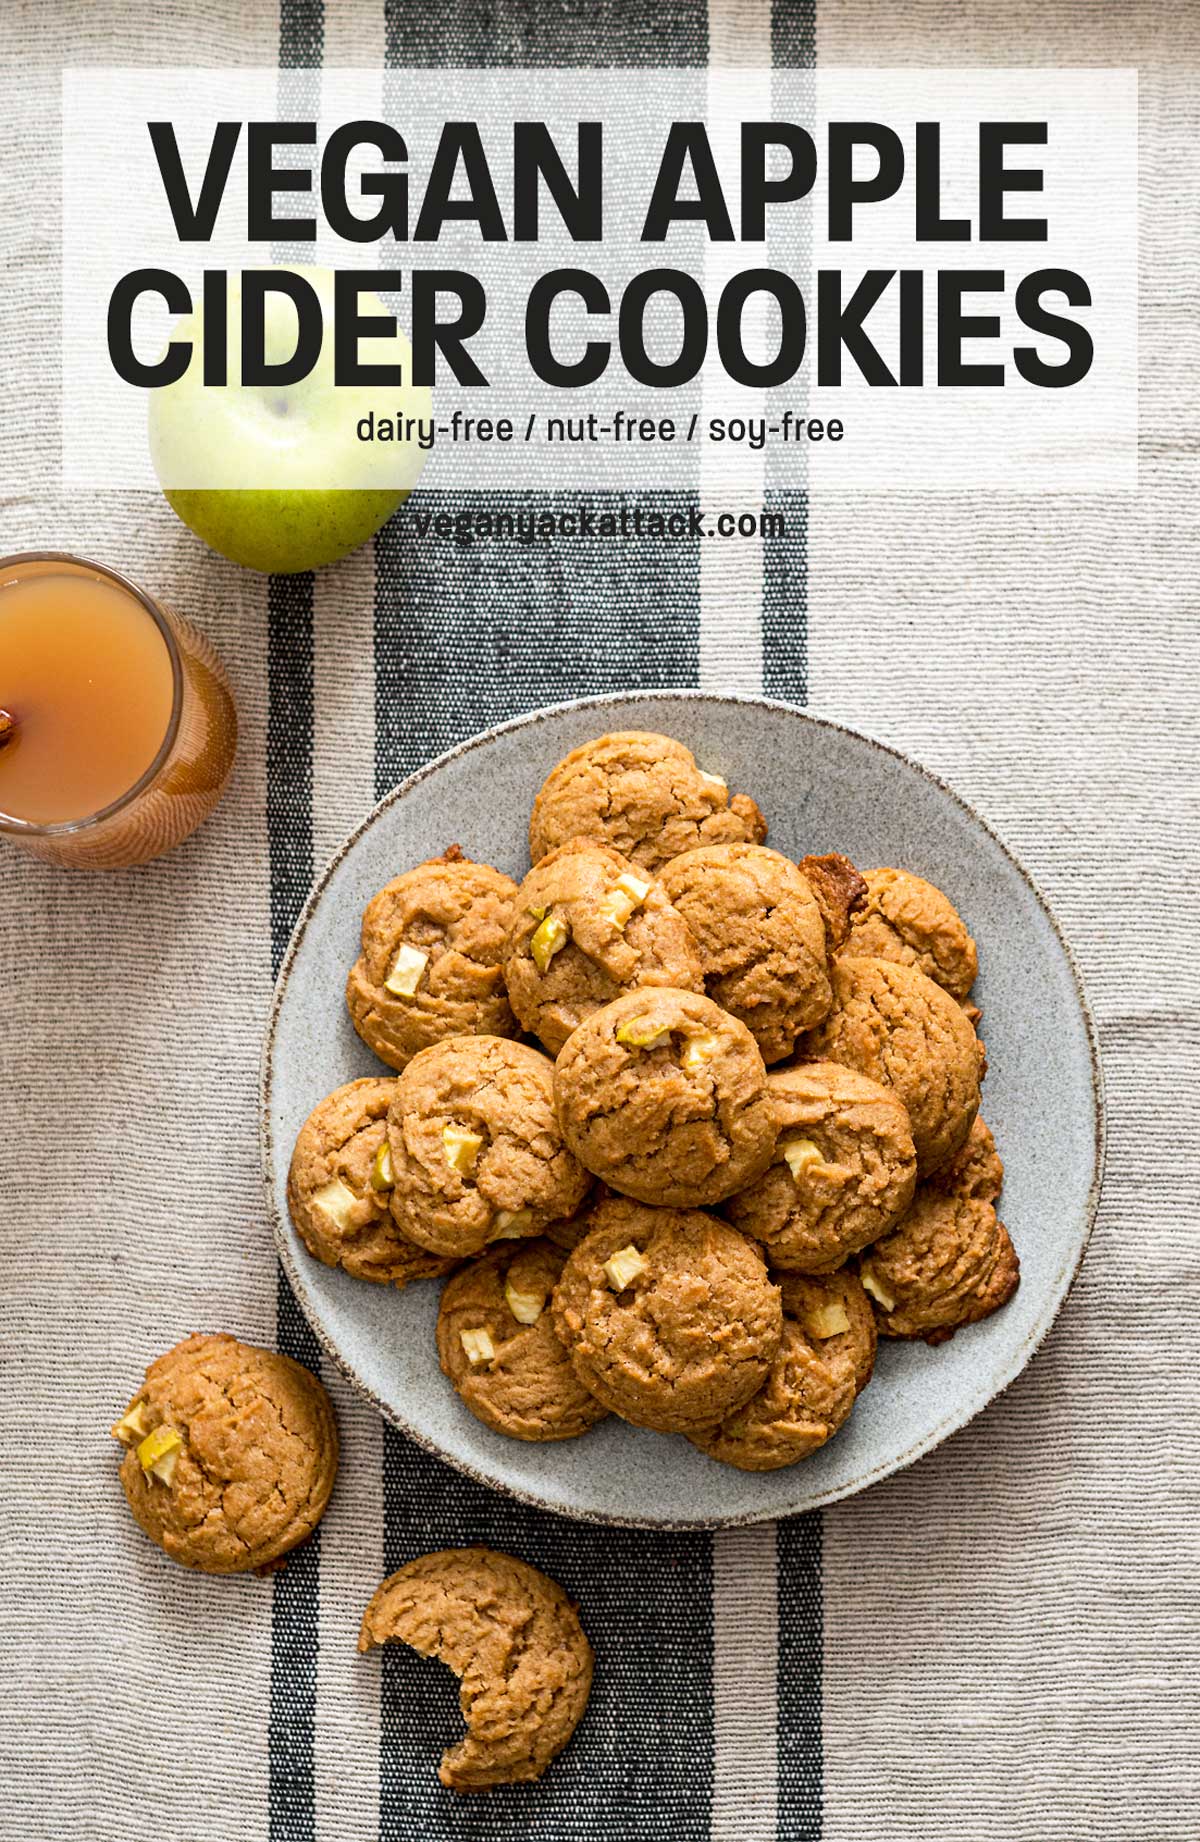 cookies in a pile on a grey plate next to a mug of cider with text overlay "vegan apple cider cookies"